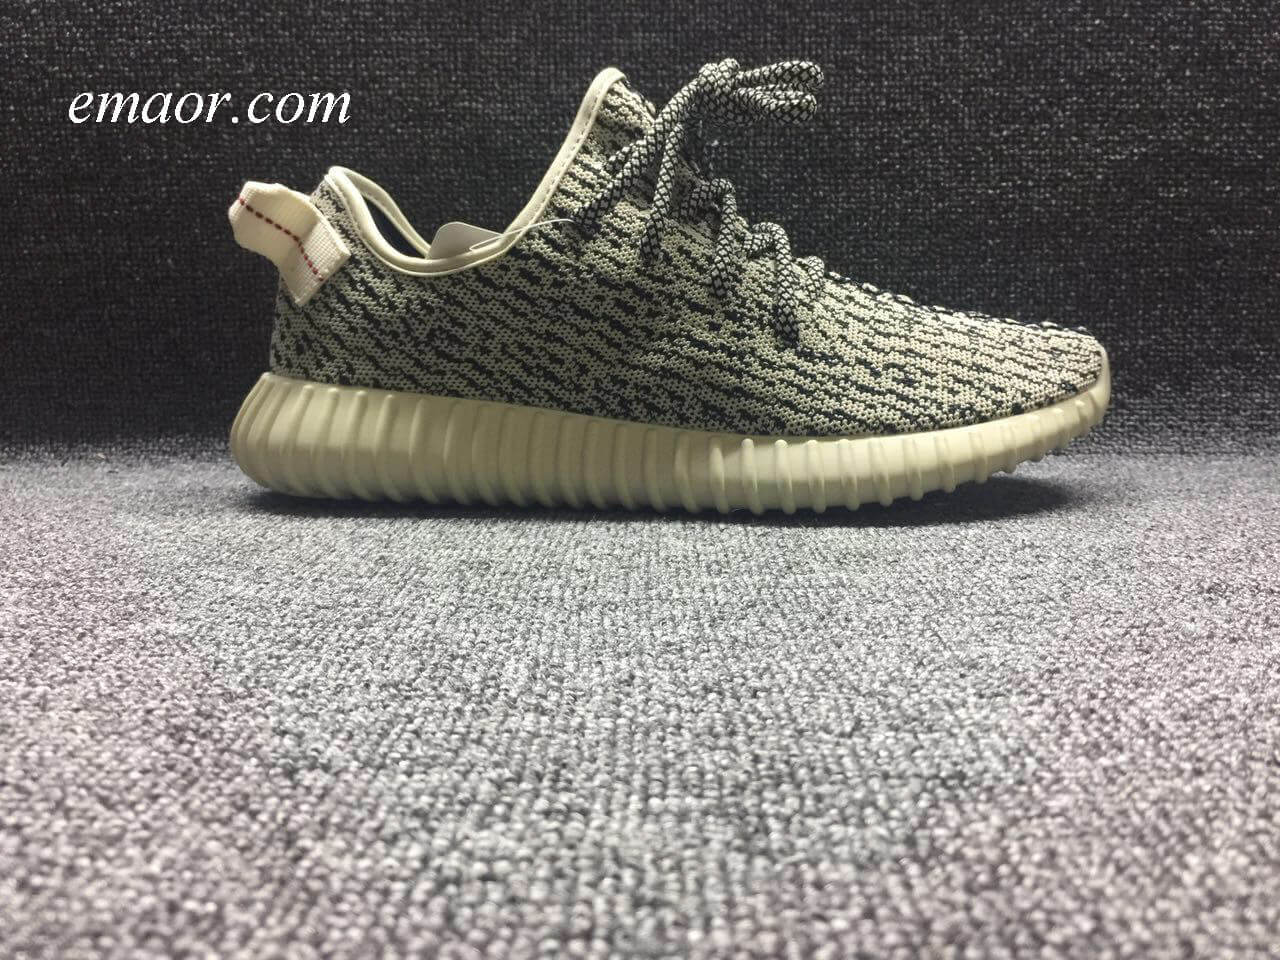 Cheap Yeezy Boost 350 V2 Lundmark Nonreflective Size 105 Used Read To Ship